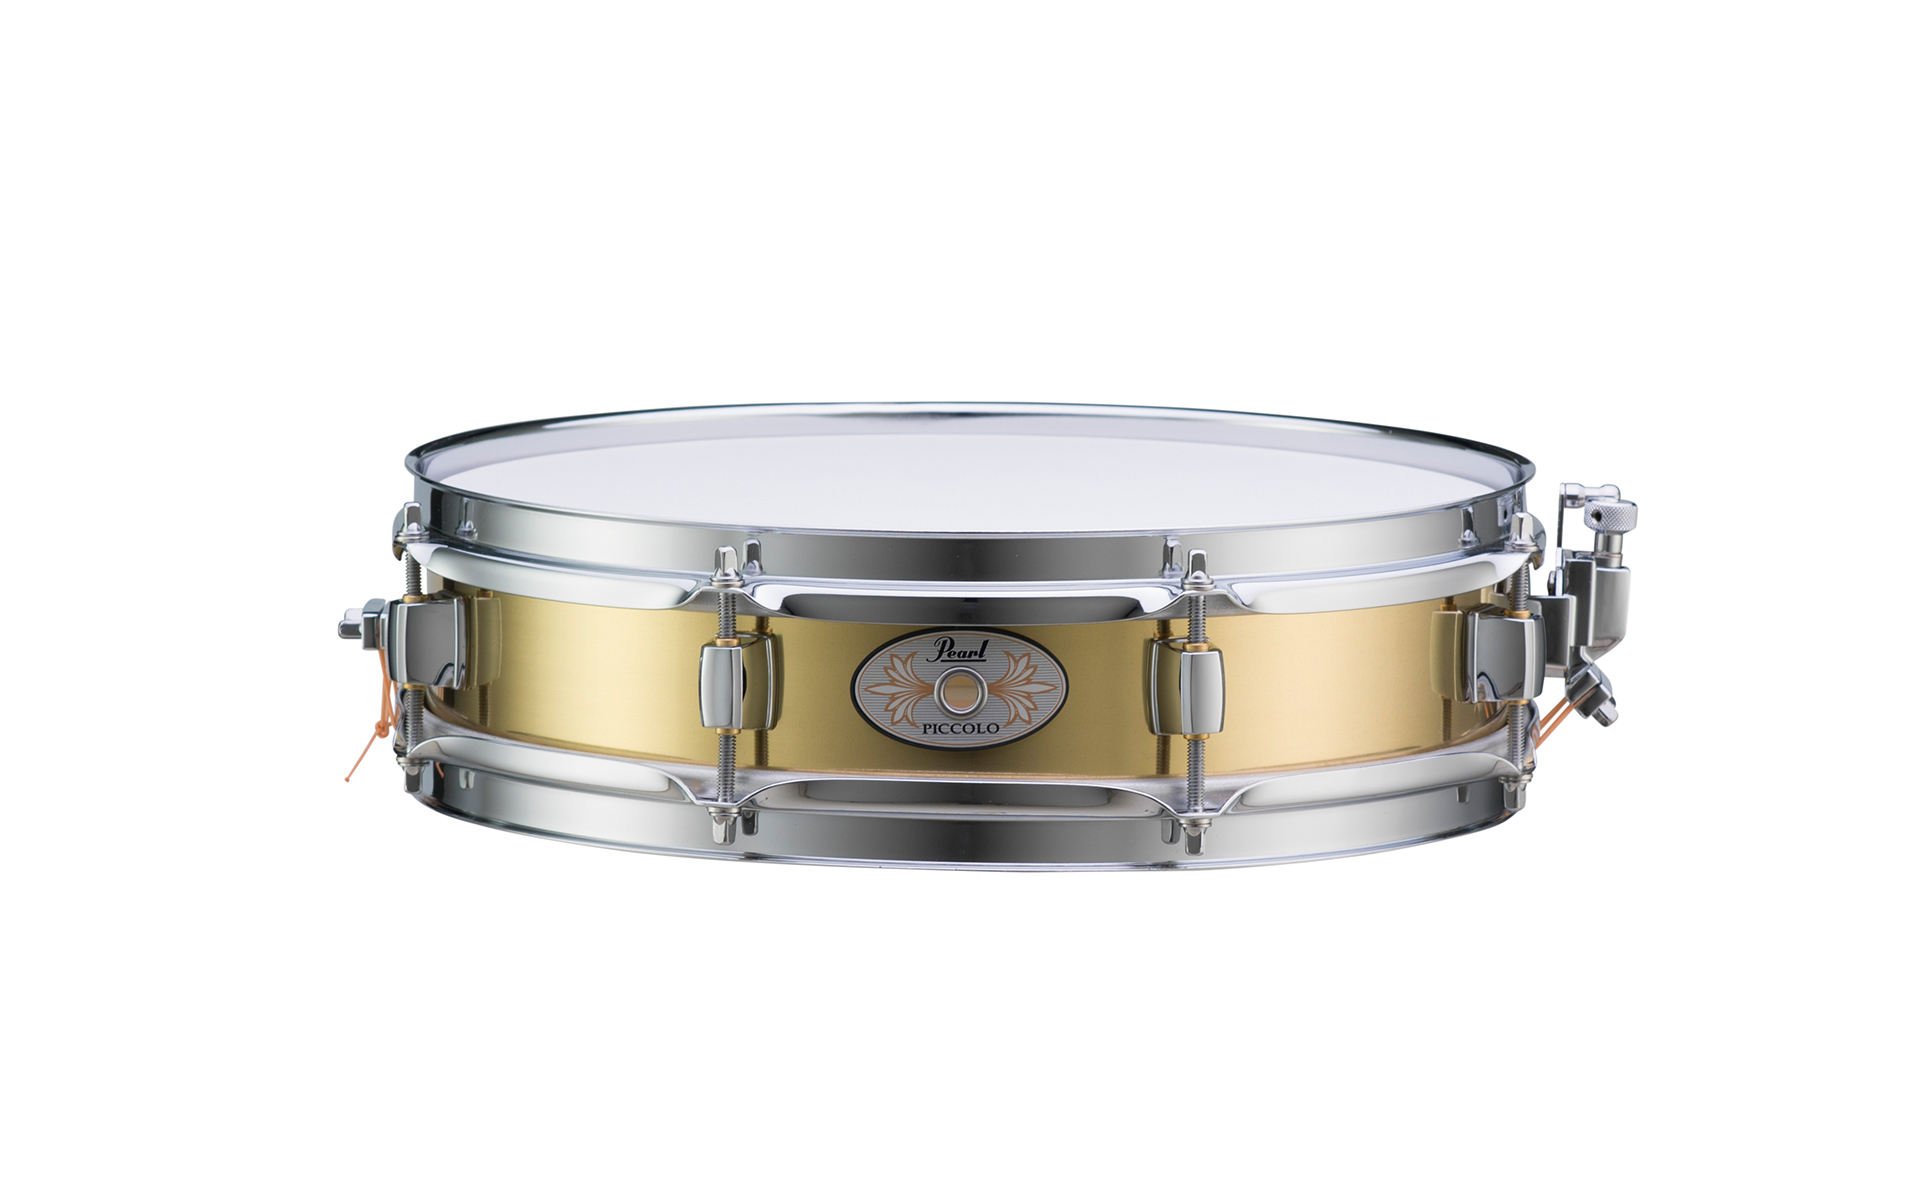 https://pearldrum.com/sites/default/files/image_folder/PRODUCTS/OTHER/PRODUCT_THUMBNAIL%235/SNARE/B1330_EFFECTS%20SNARES%20BRASS%2013X3_IMG_5thumbnail_EFFECTS%20SNARES%20BRASS%2013X3.jpg